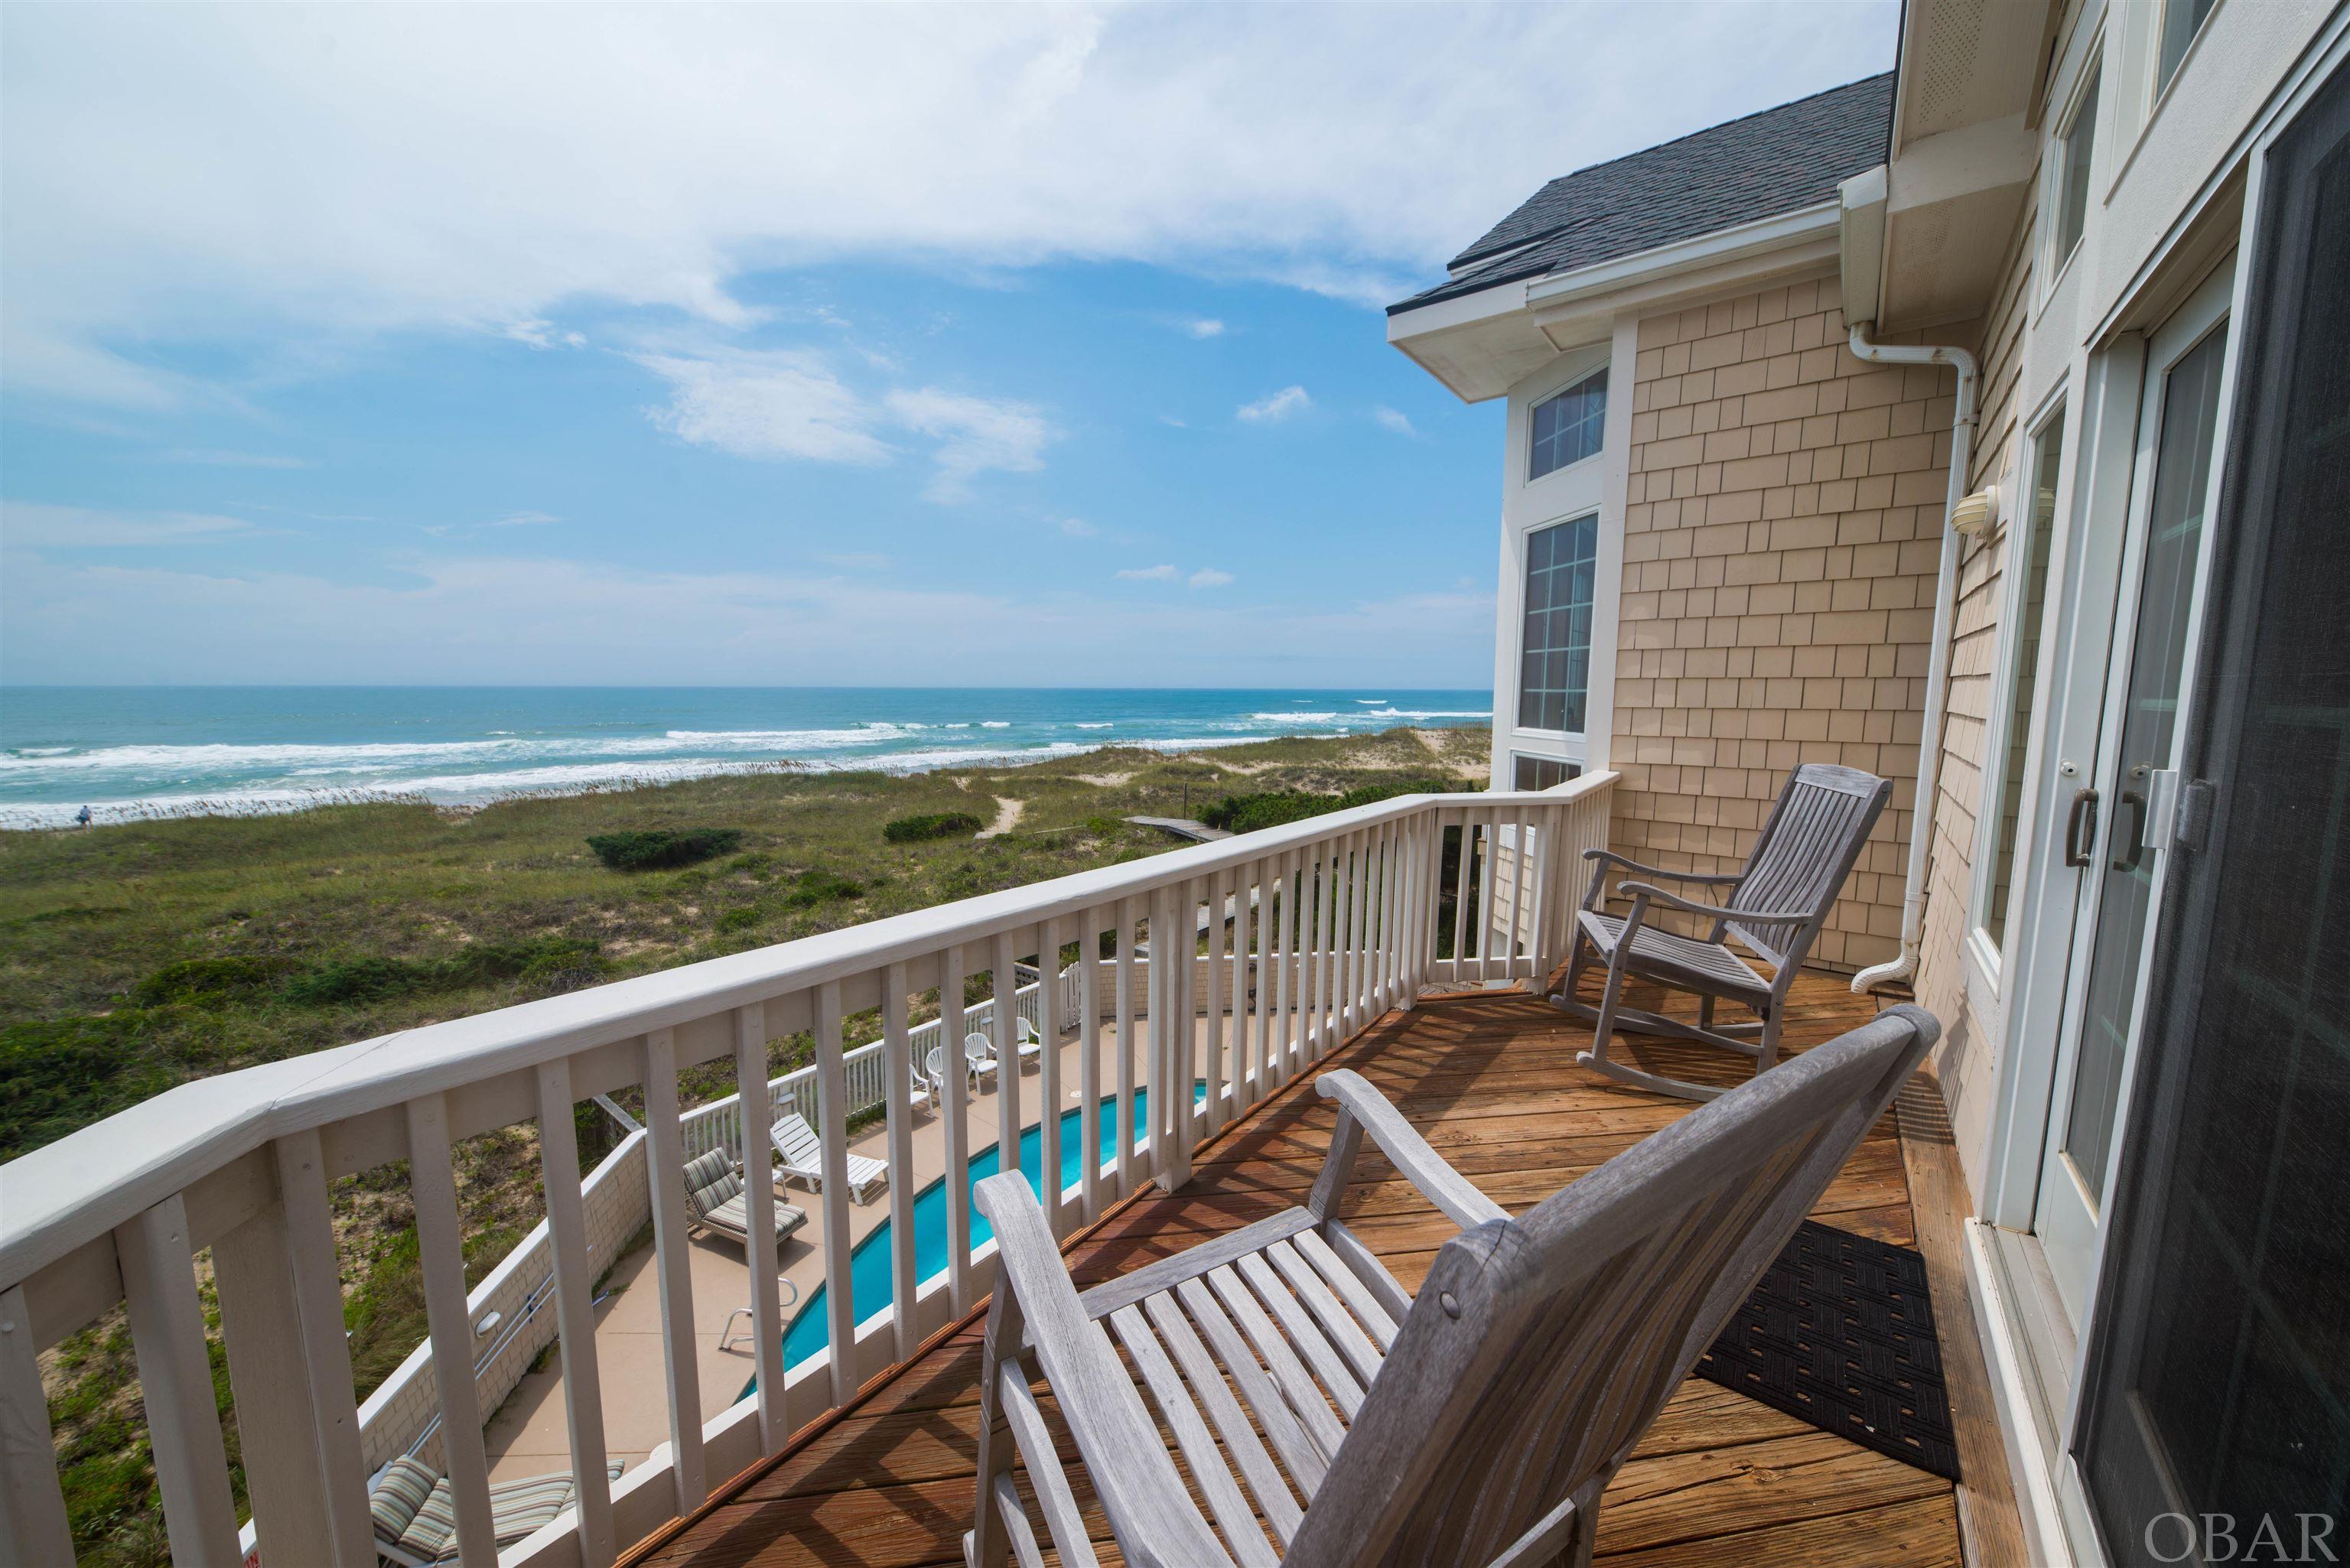 58055 South Beach Court, Hatteras, NC 27943, 7 Bedrooms Bedrooms, ,7 BathroomsBathrooms,Residential,For Sale,South Beach Court,119998